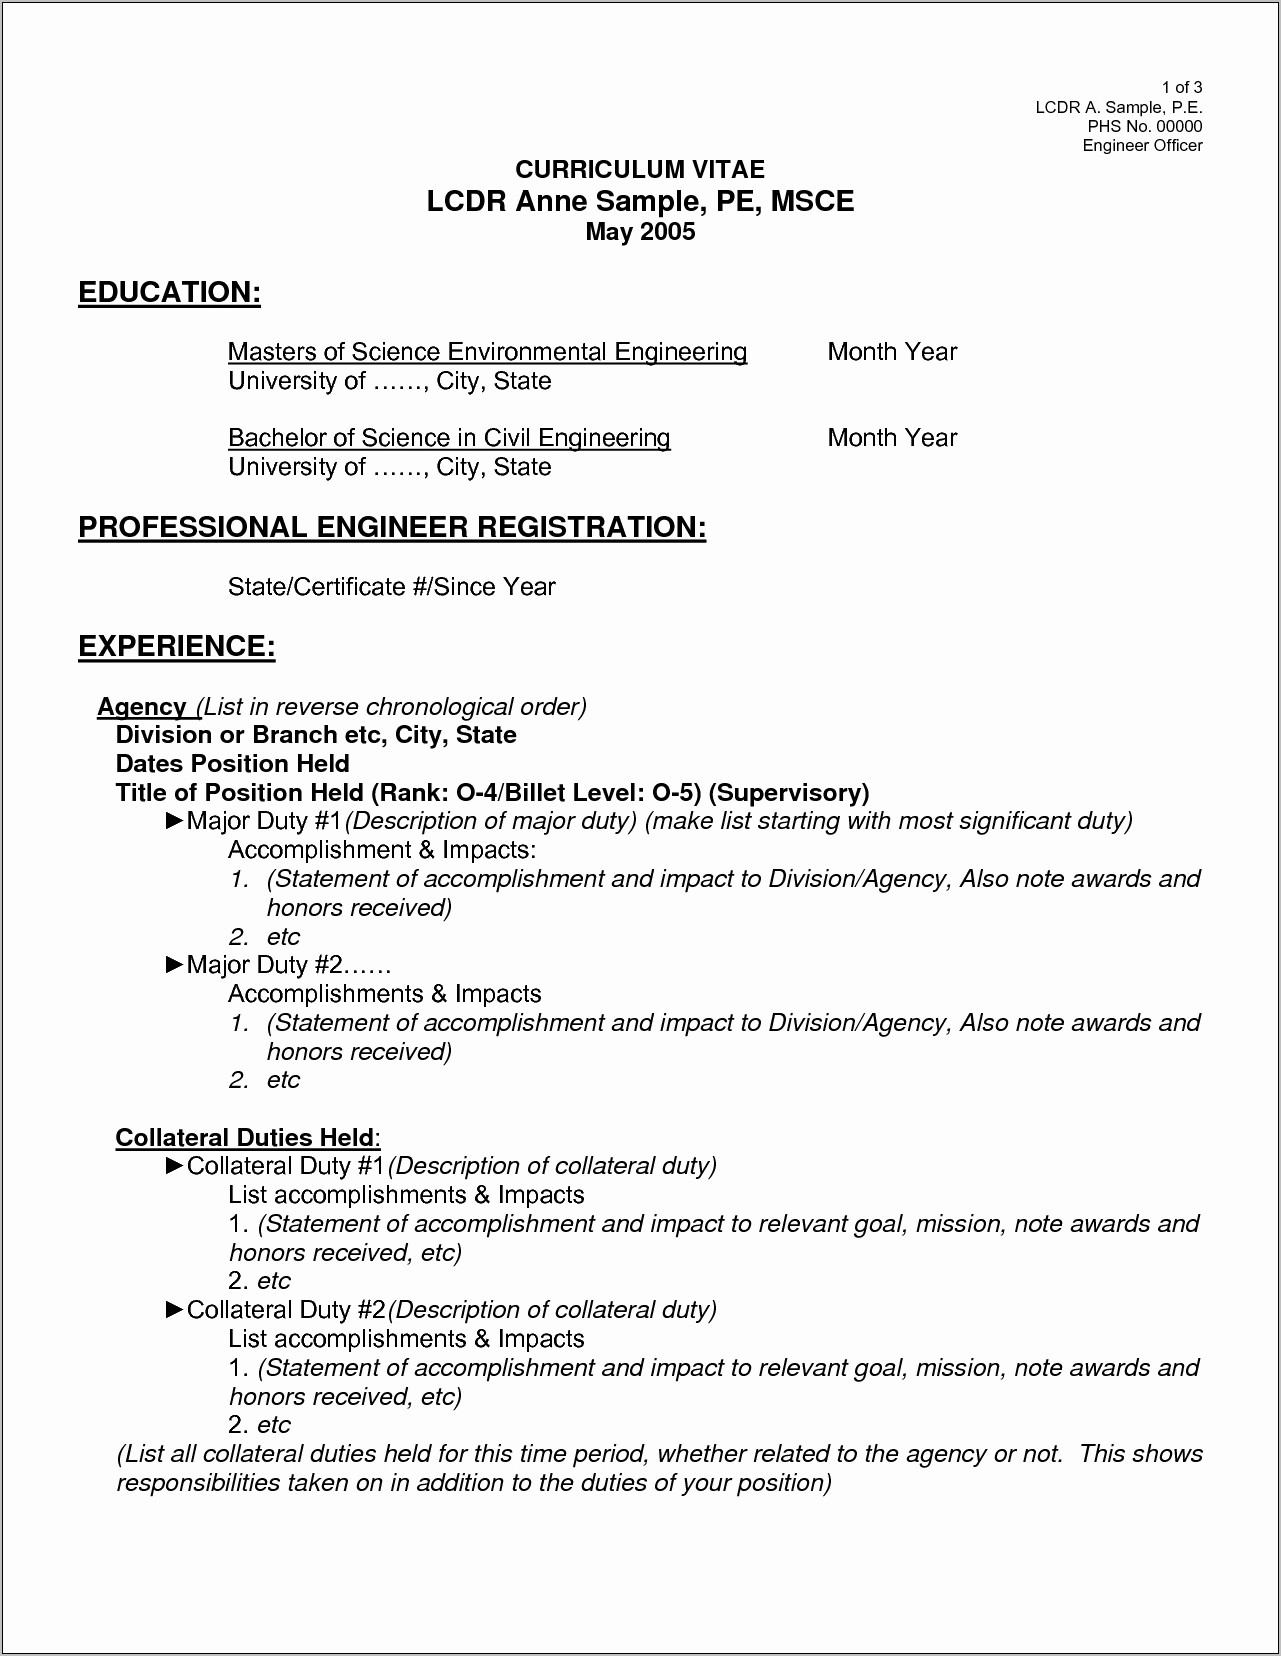 Resume Format Doc For Civil Engineer Experienced